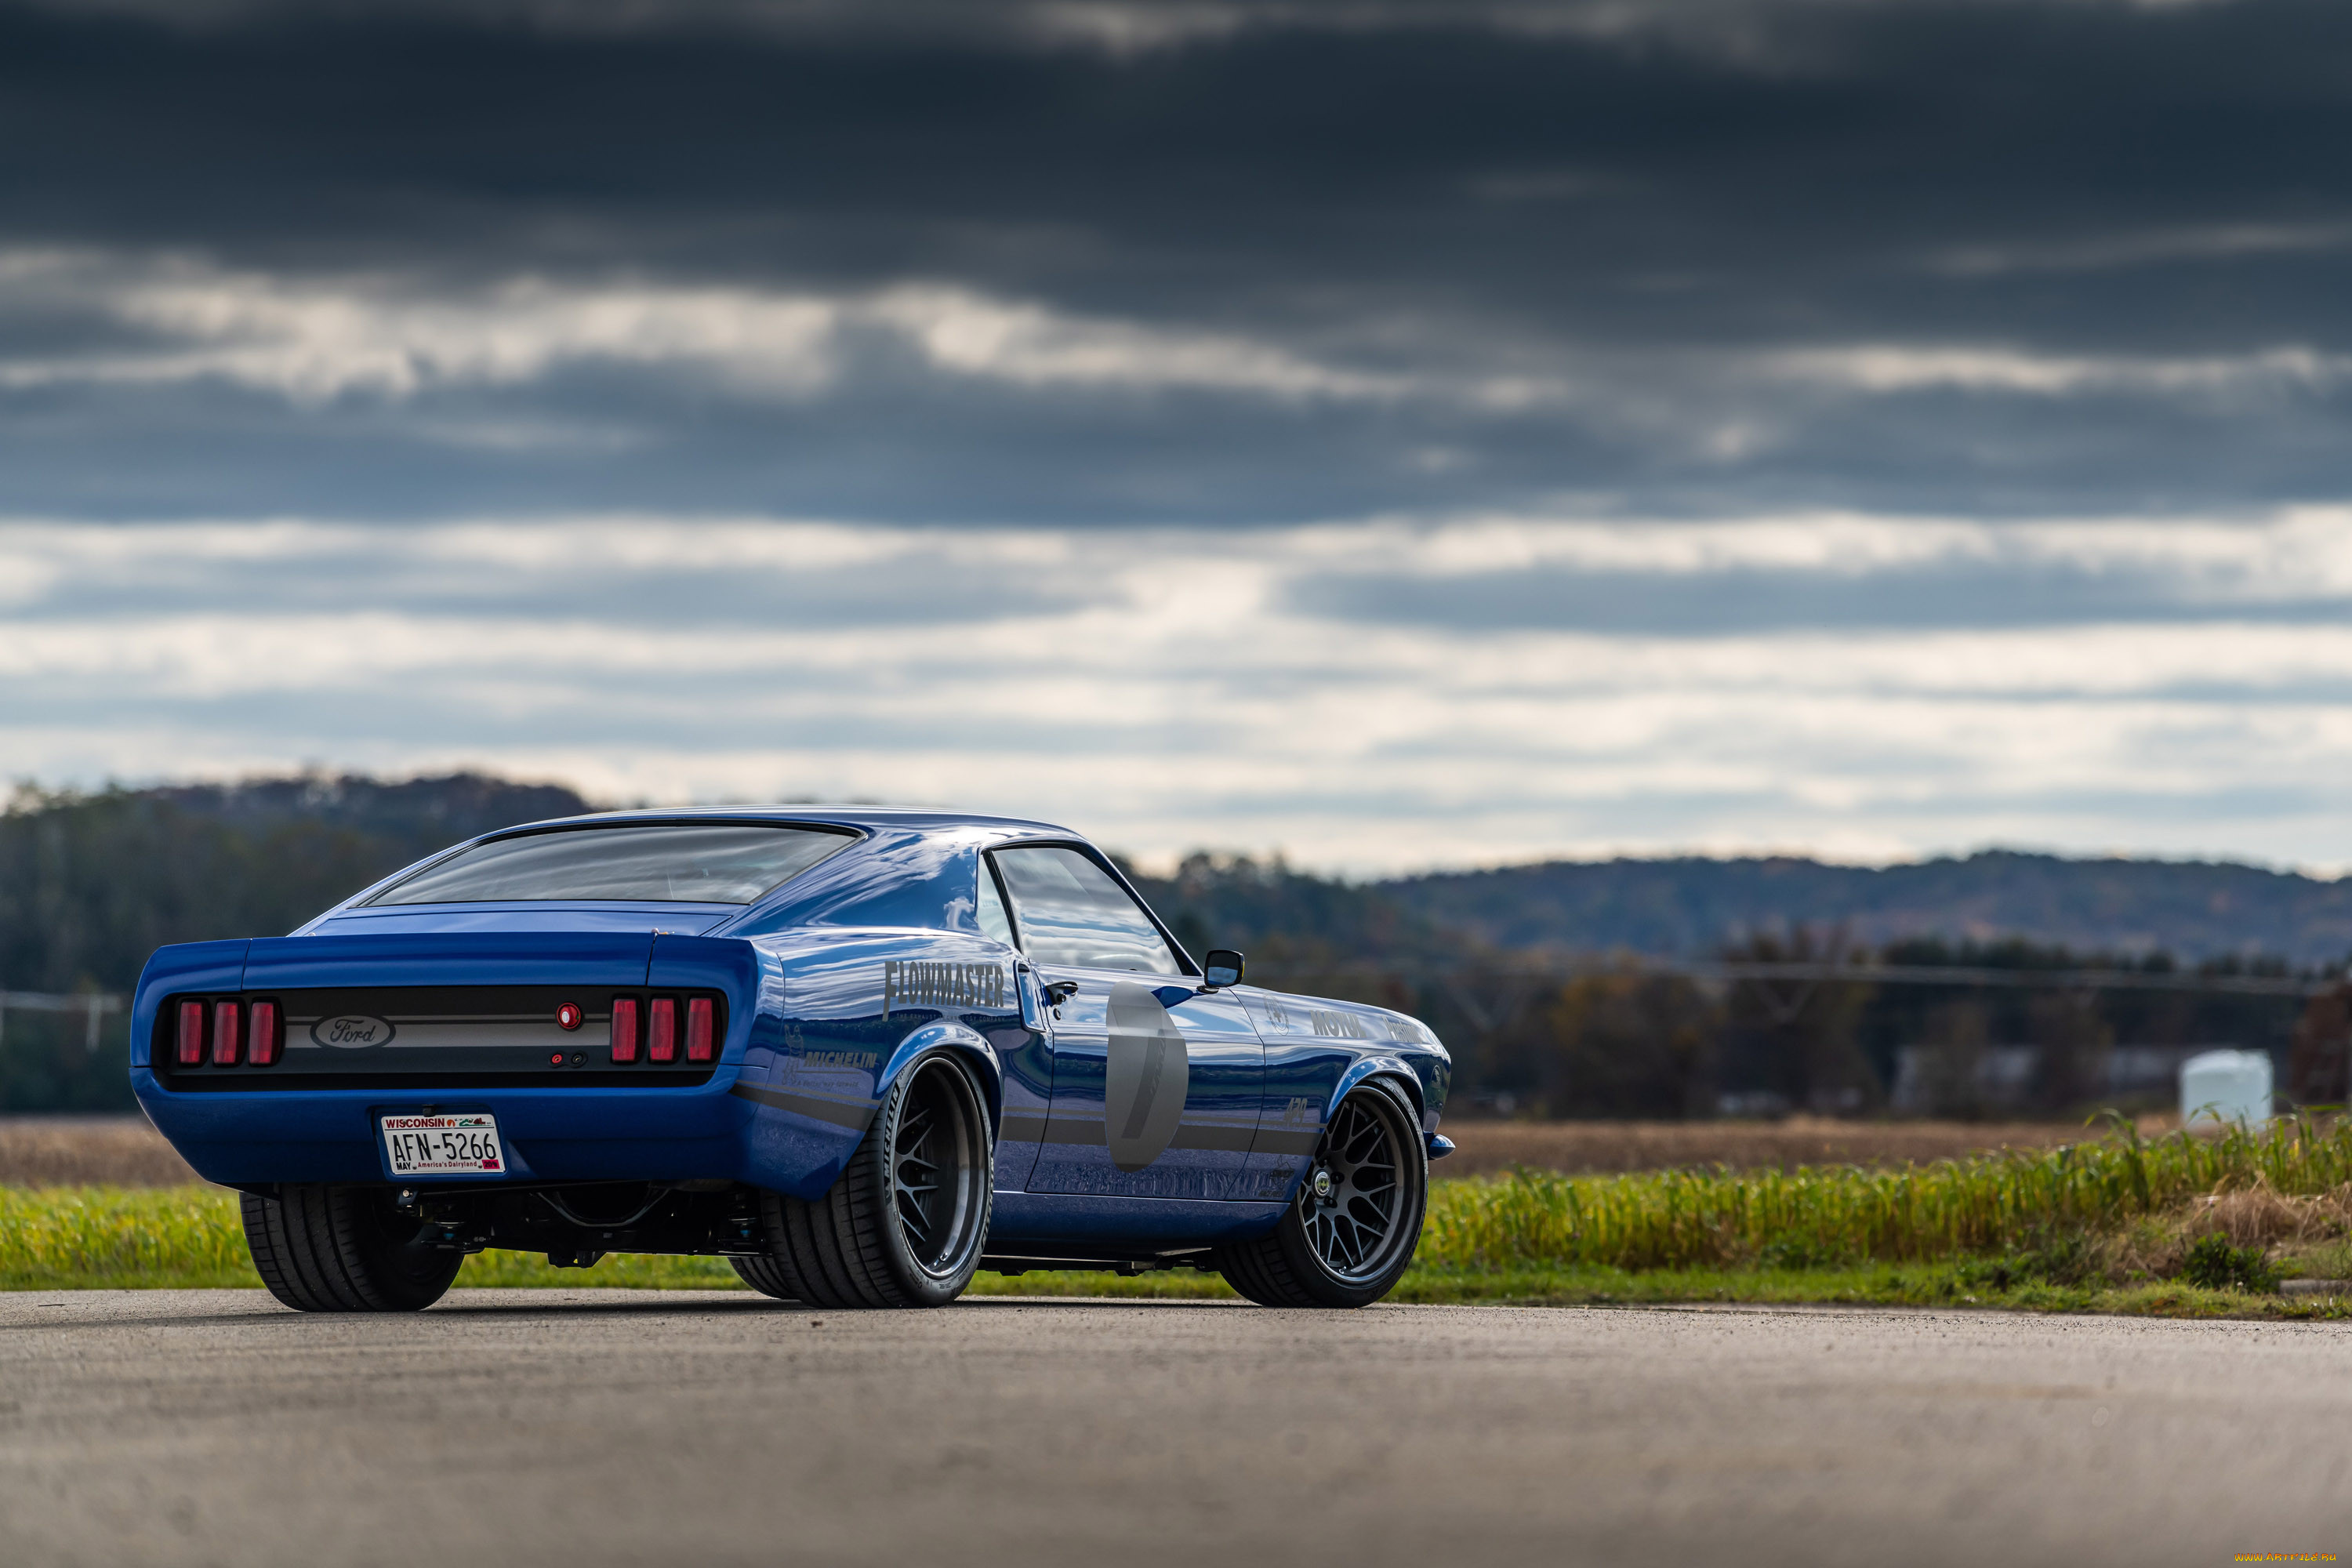 2019 ringbrothers ford mustang uncl, , ford, ringbrothers, 2019, , , , uncl, mustang